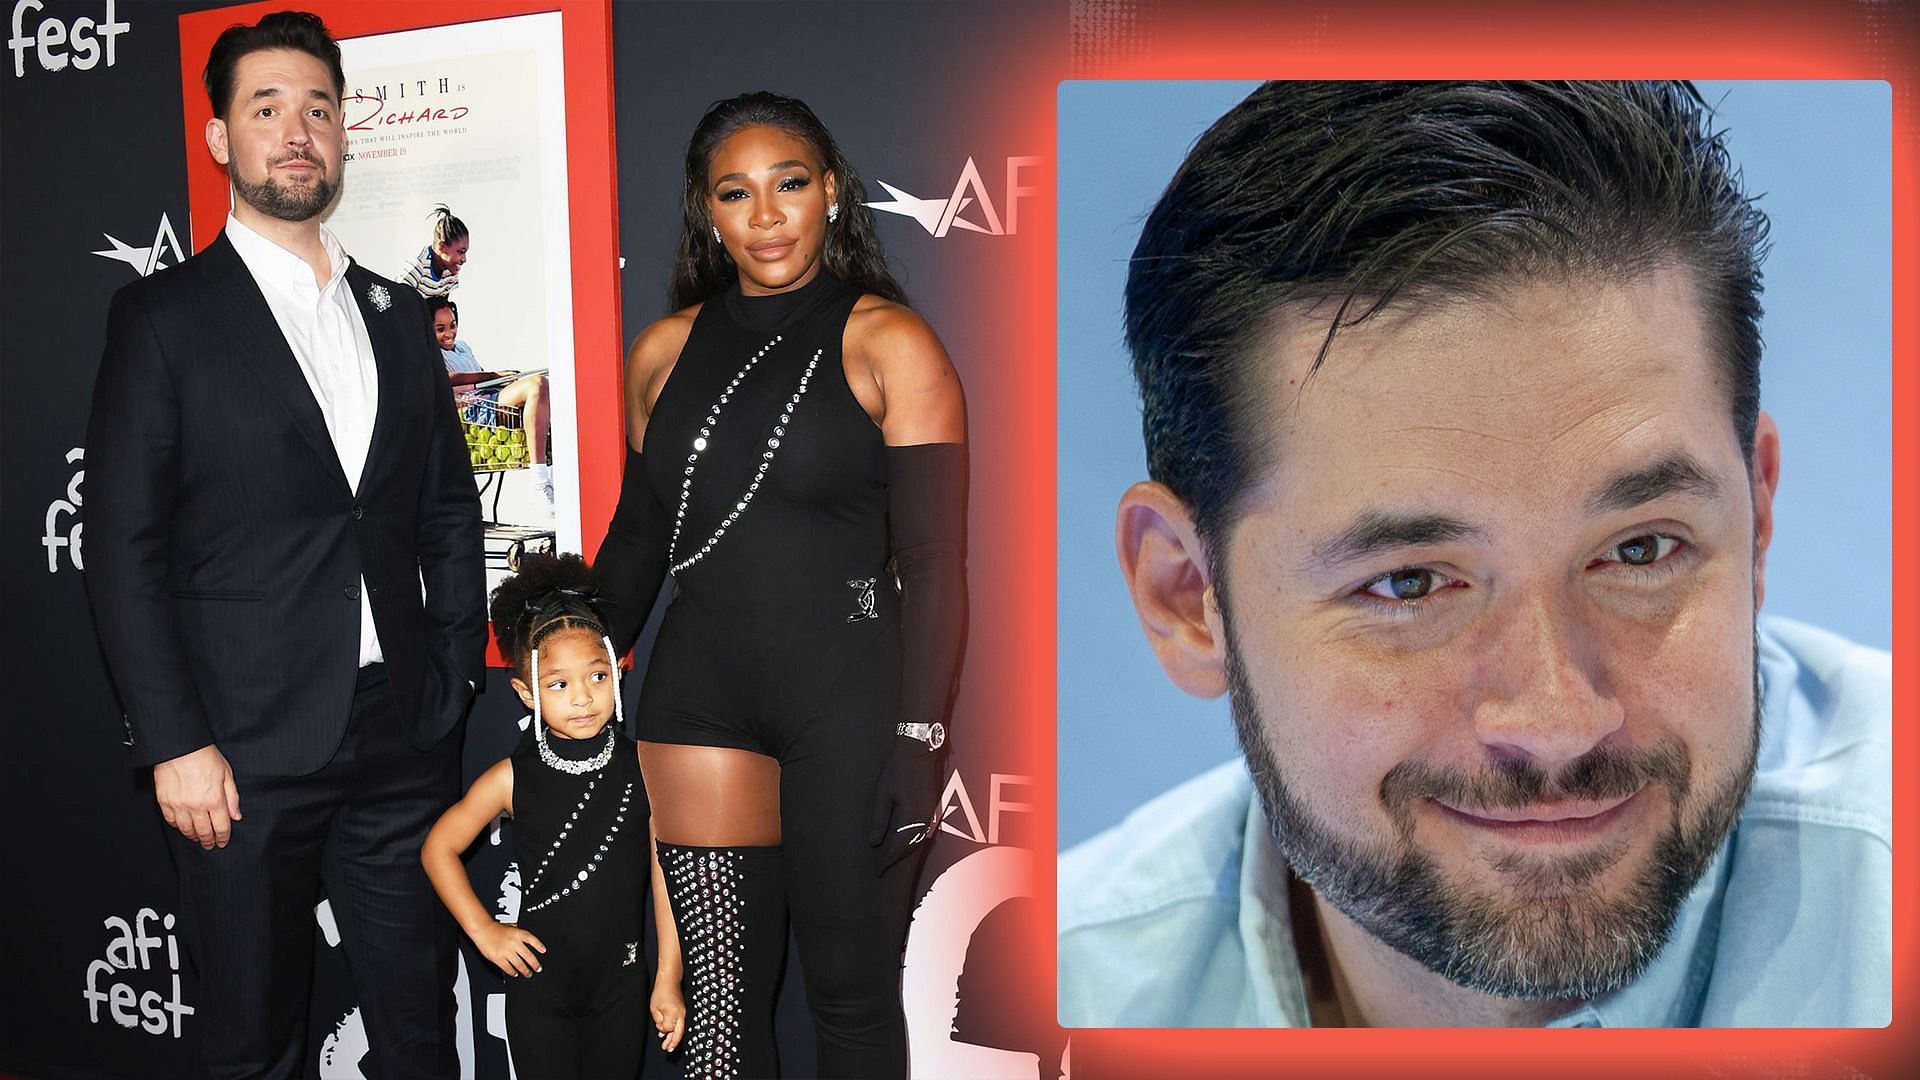 Serena Williams' husband Alexis Ohanian gets emotional after his father asks him to sign his book